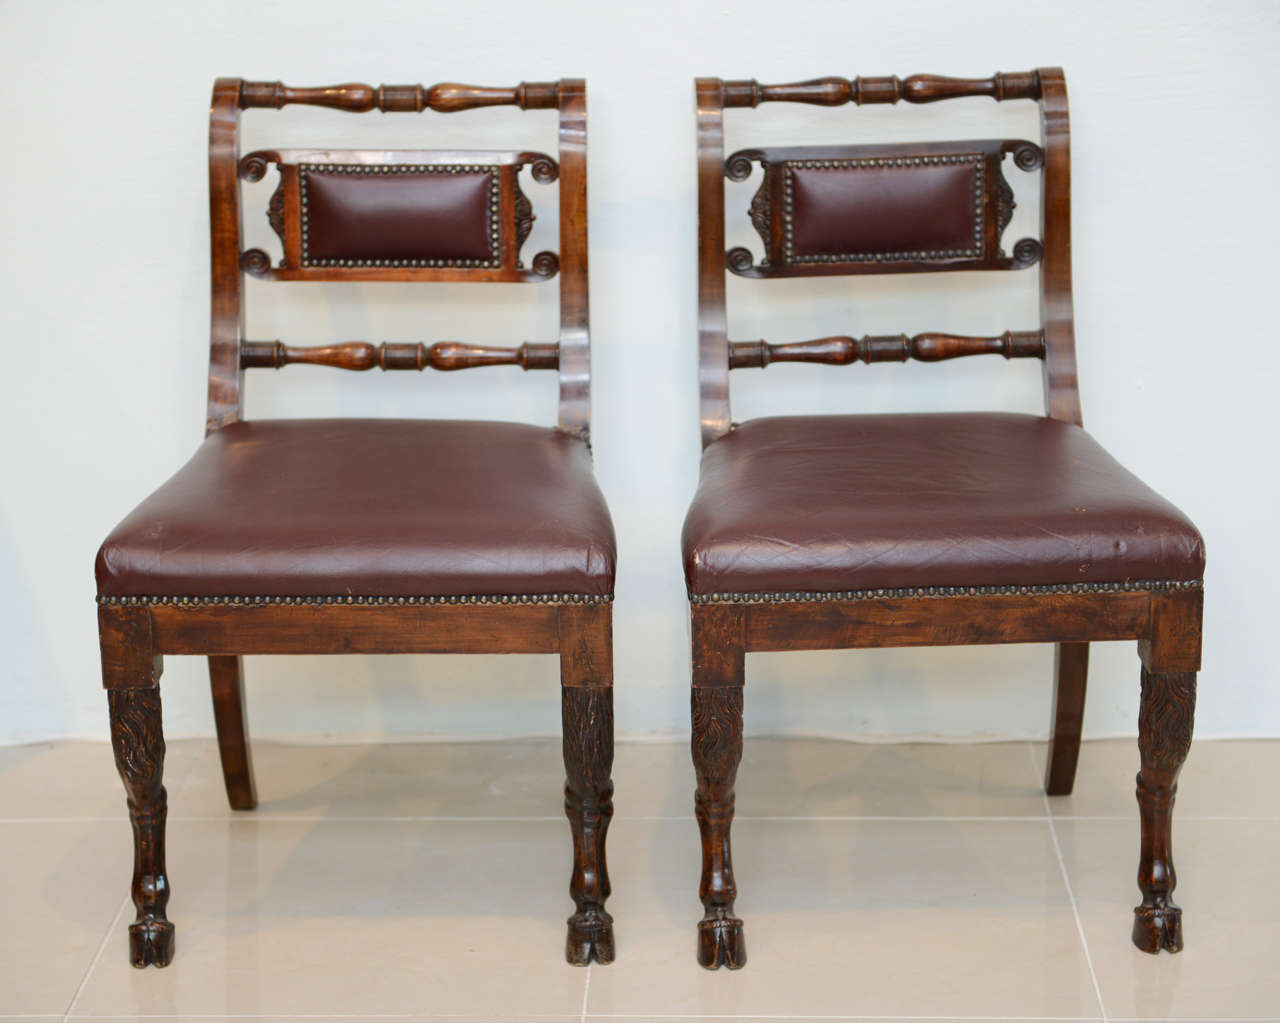 The reeded back with rolled backs plat over animal legs with hoof feet, literature, Italian Empire Furniture.